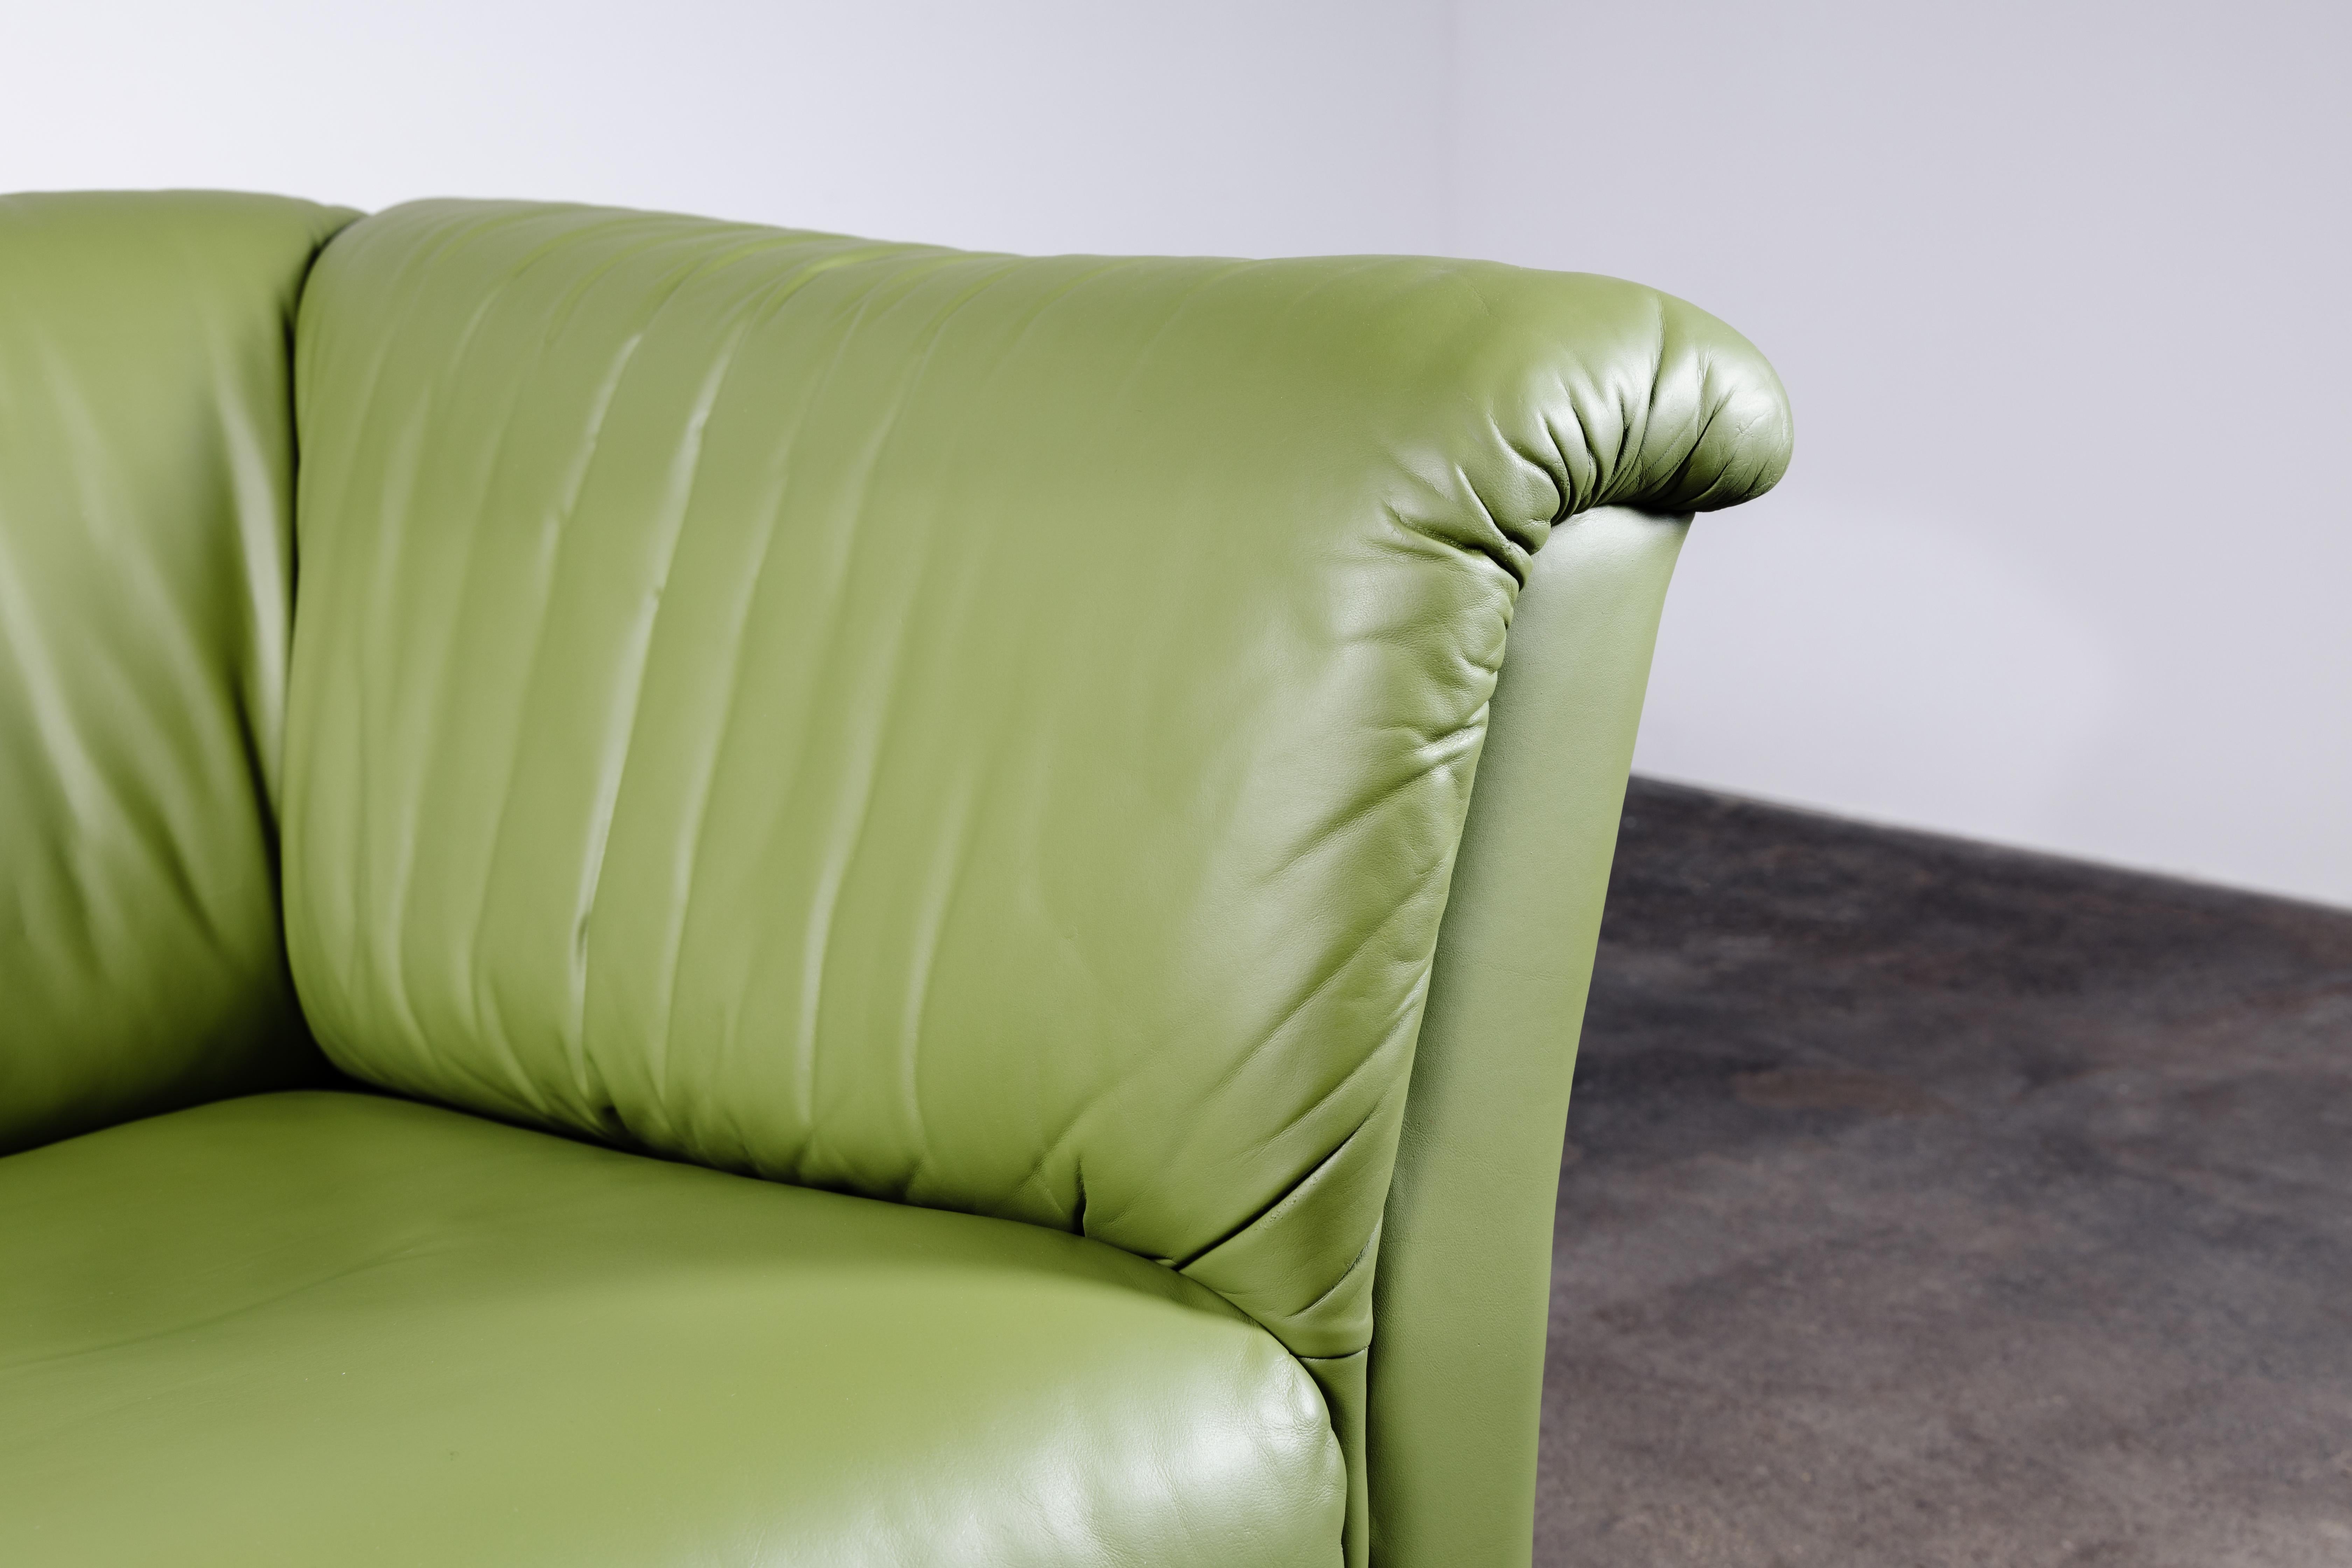 green leather sofas for sale